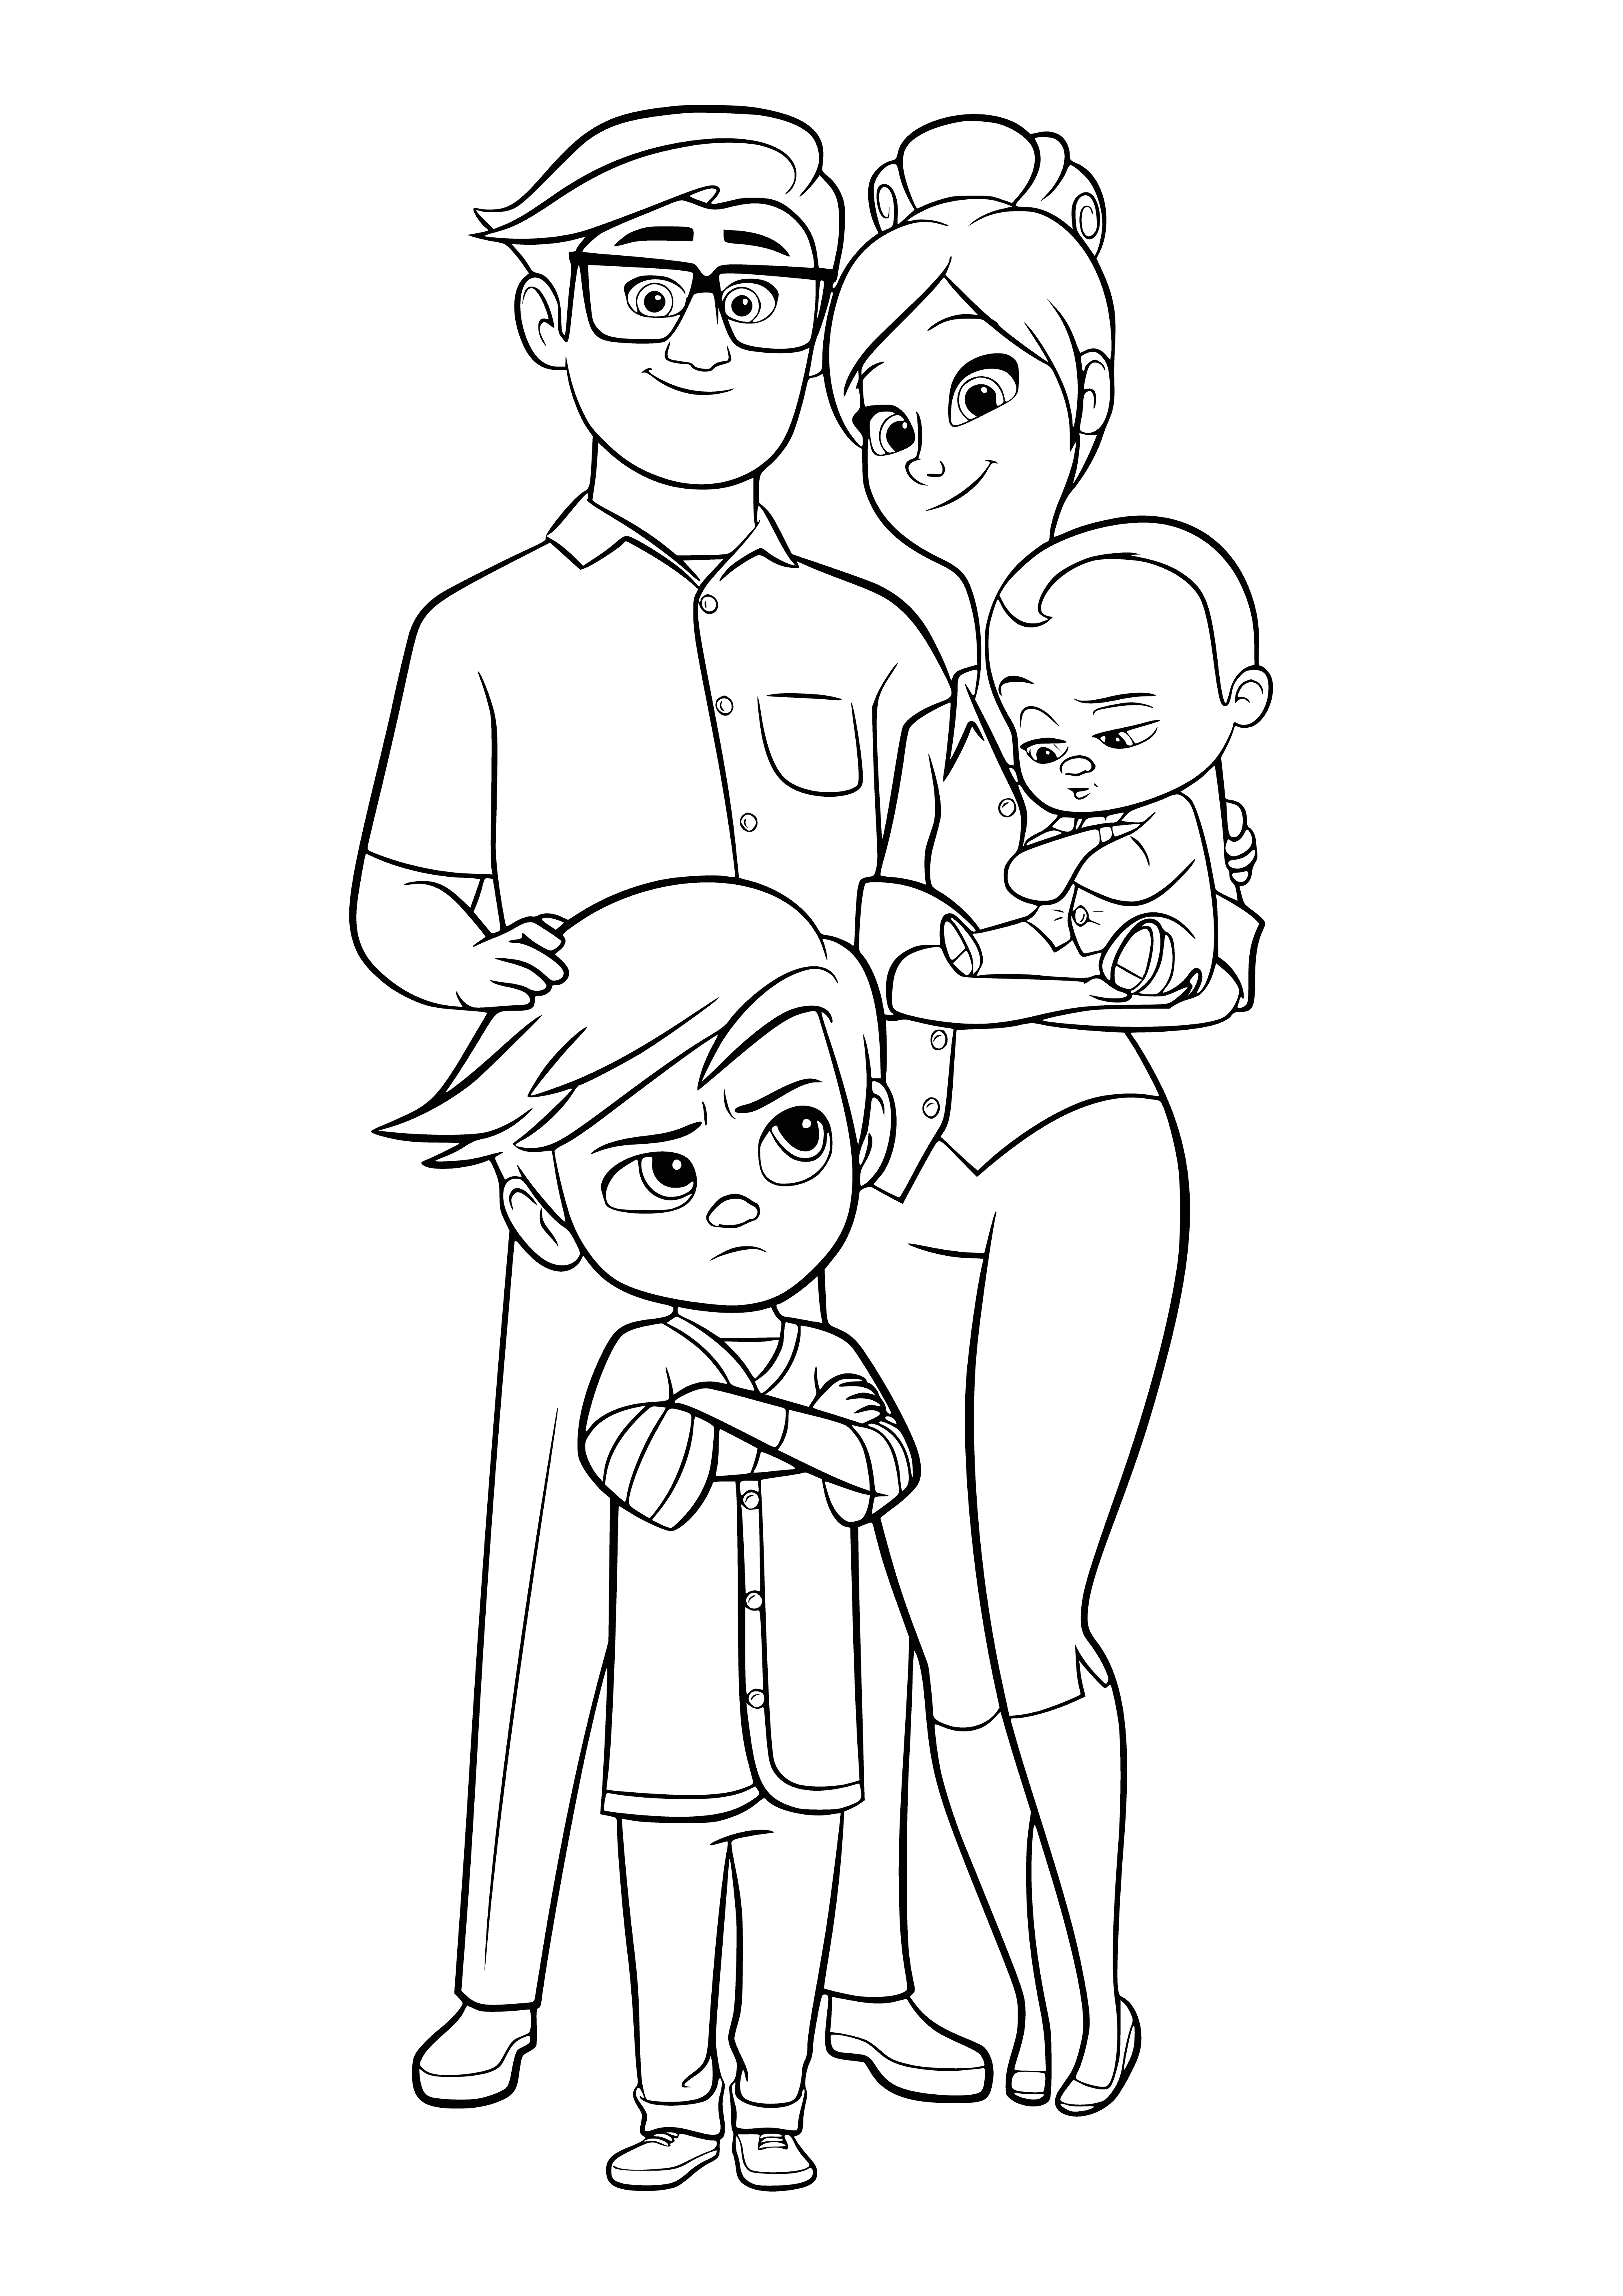 coloring page: The Templeton family loves spending time together, full of laughter and fun. #HappyFamily